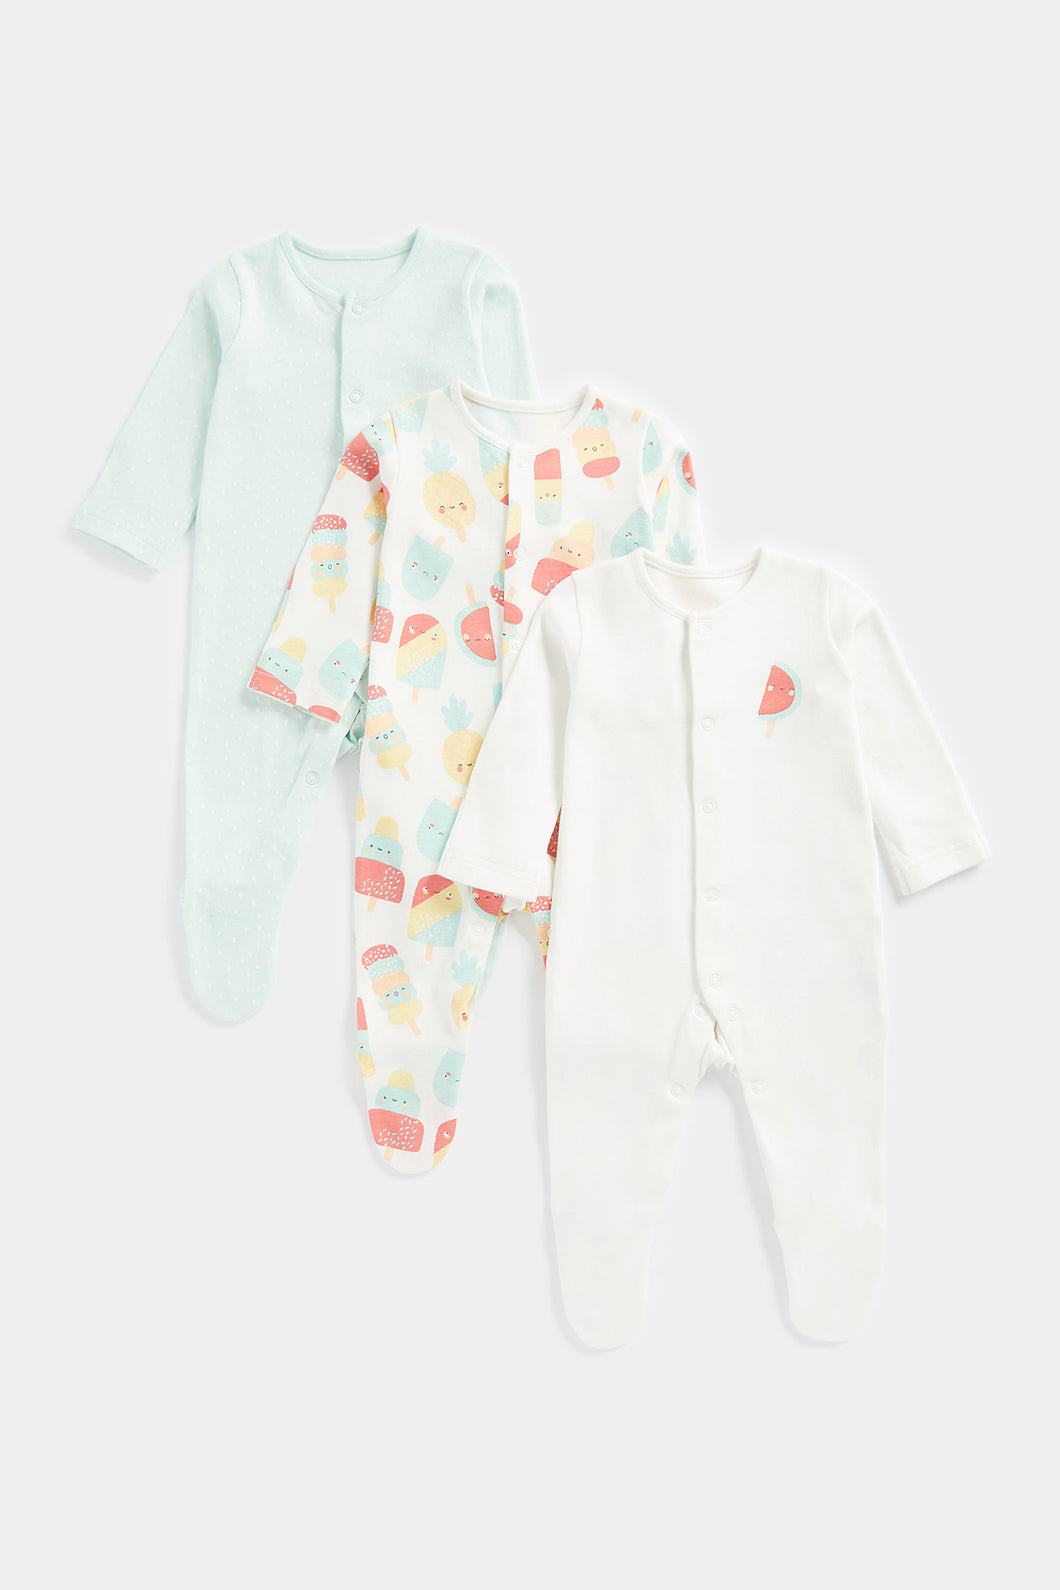 Mothercare Fruit Lolly Sleepsuits - 3 Pack